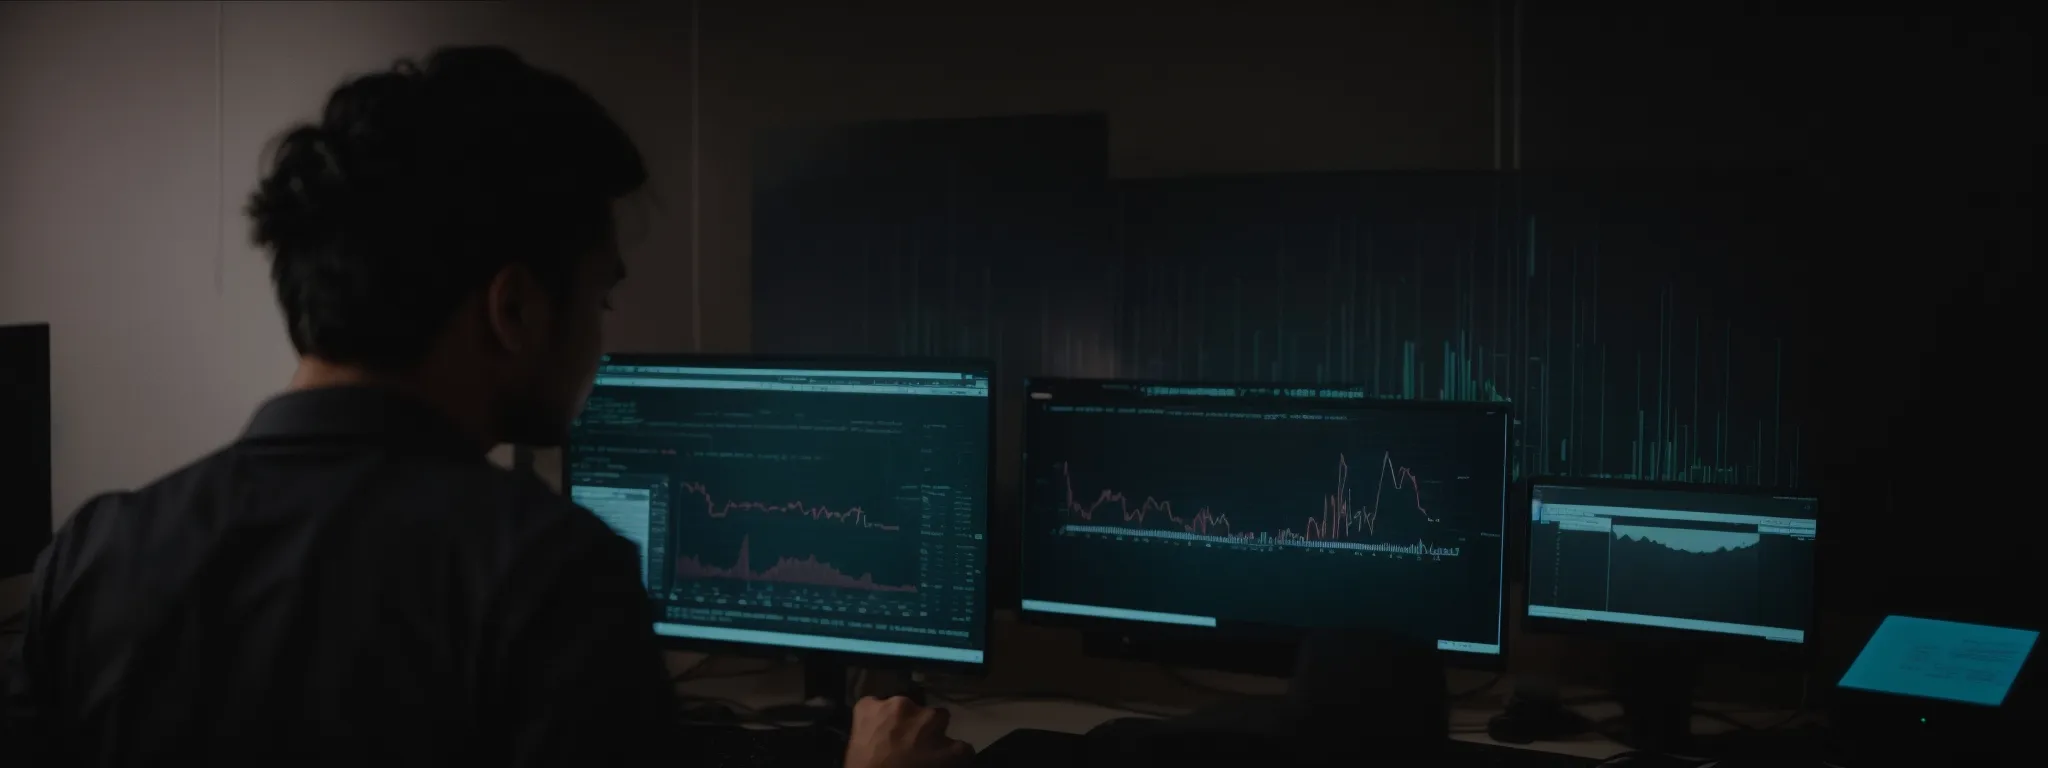 a scene of an individual analyzing data on a computer screen, reflecting focus on seo trends and strategies.